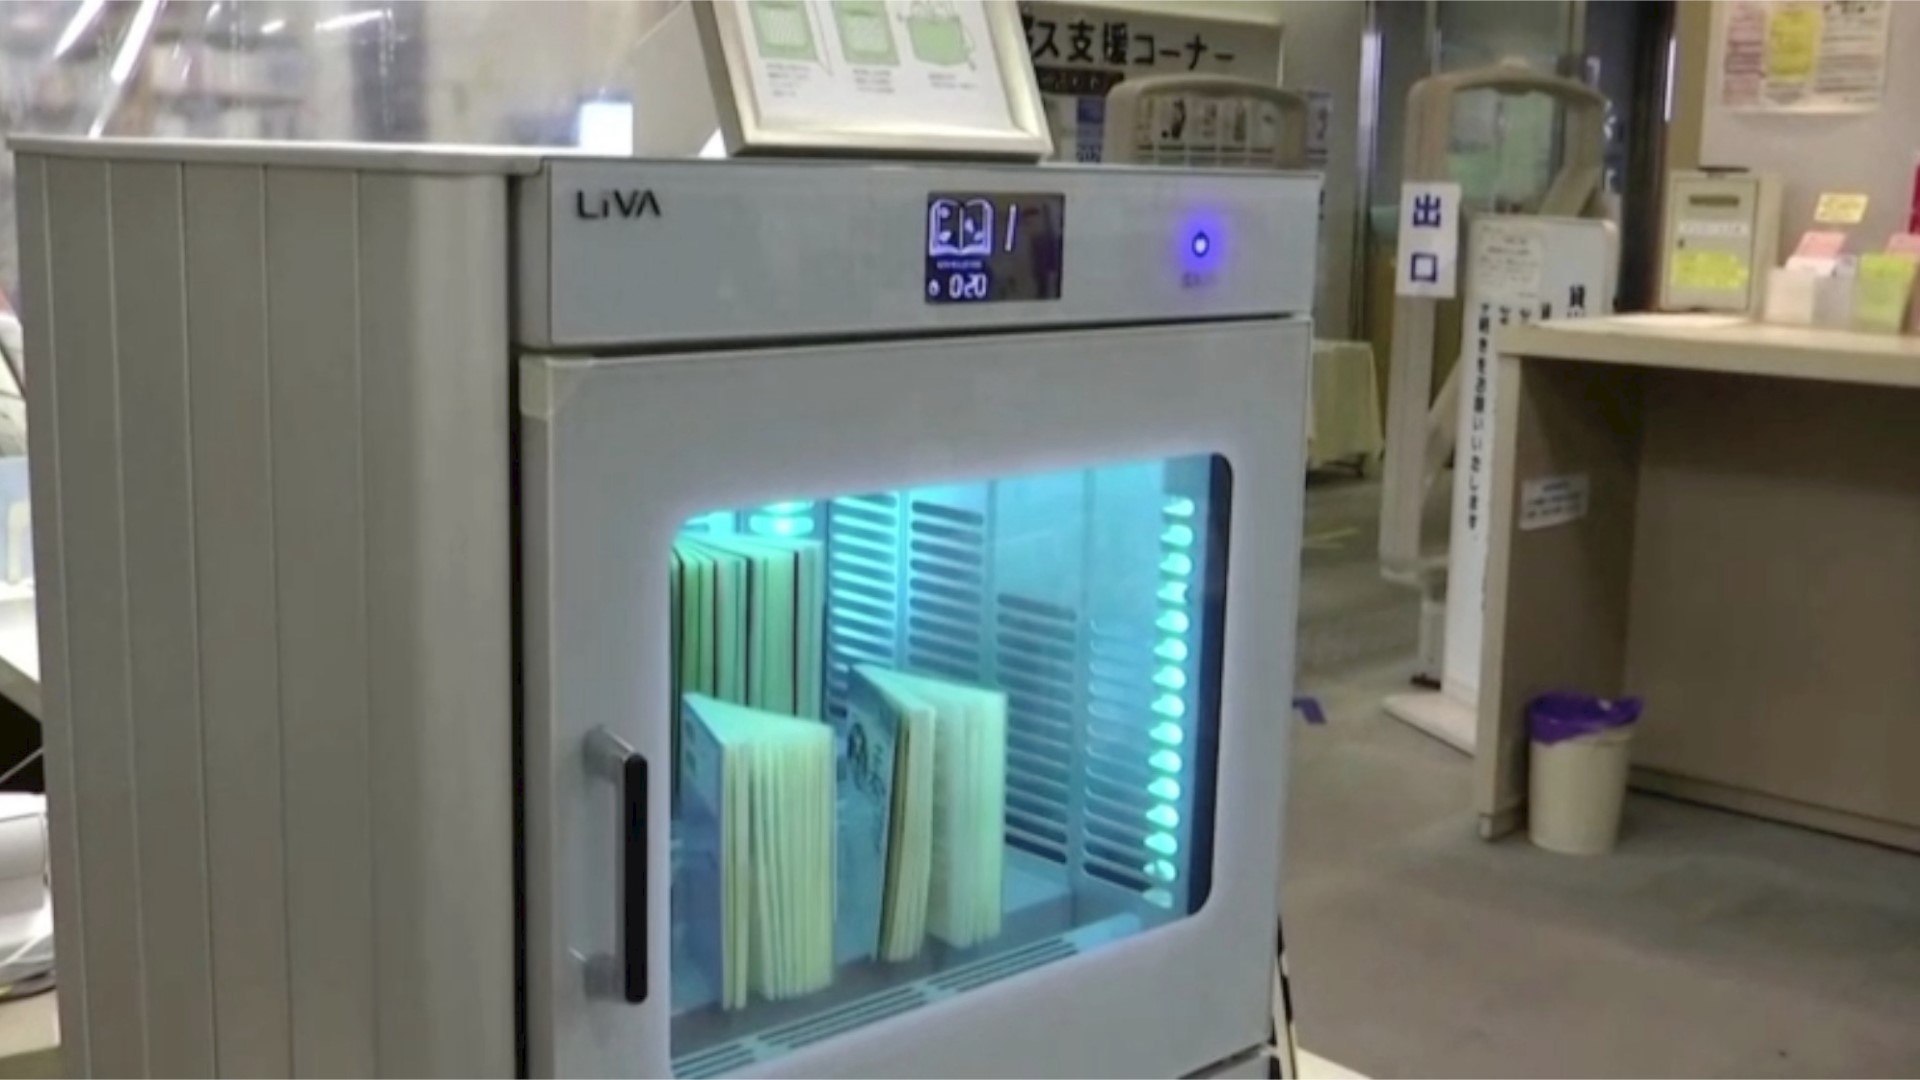 This UV light machine will let you check out books with peace of mind.